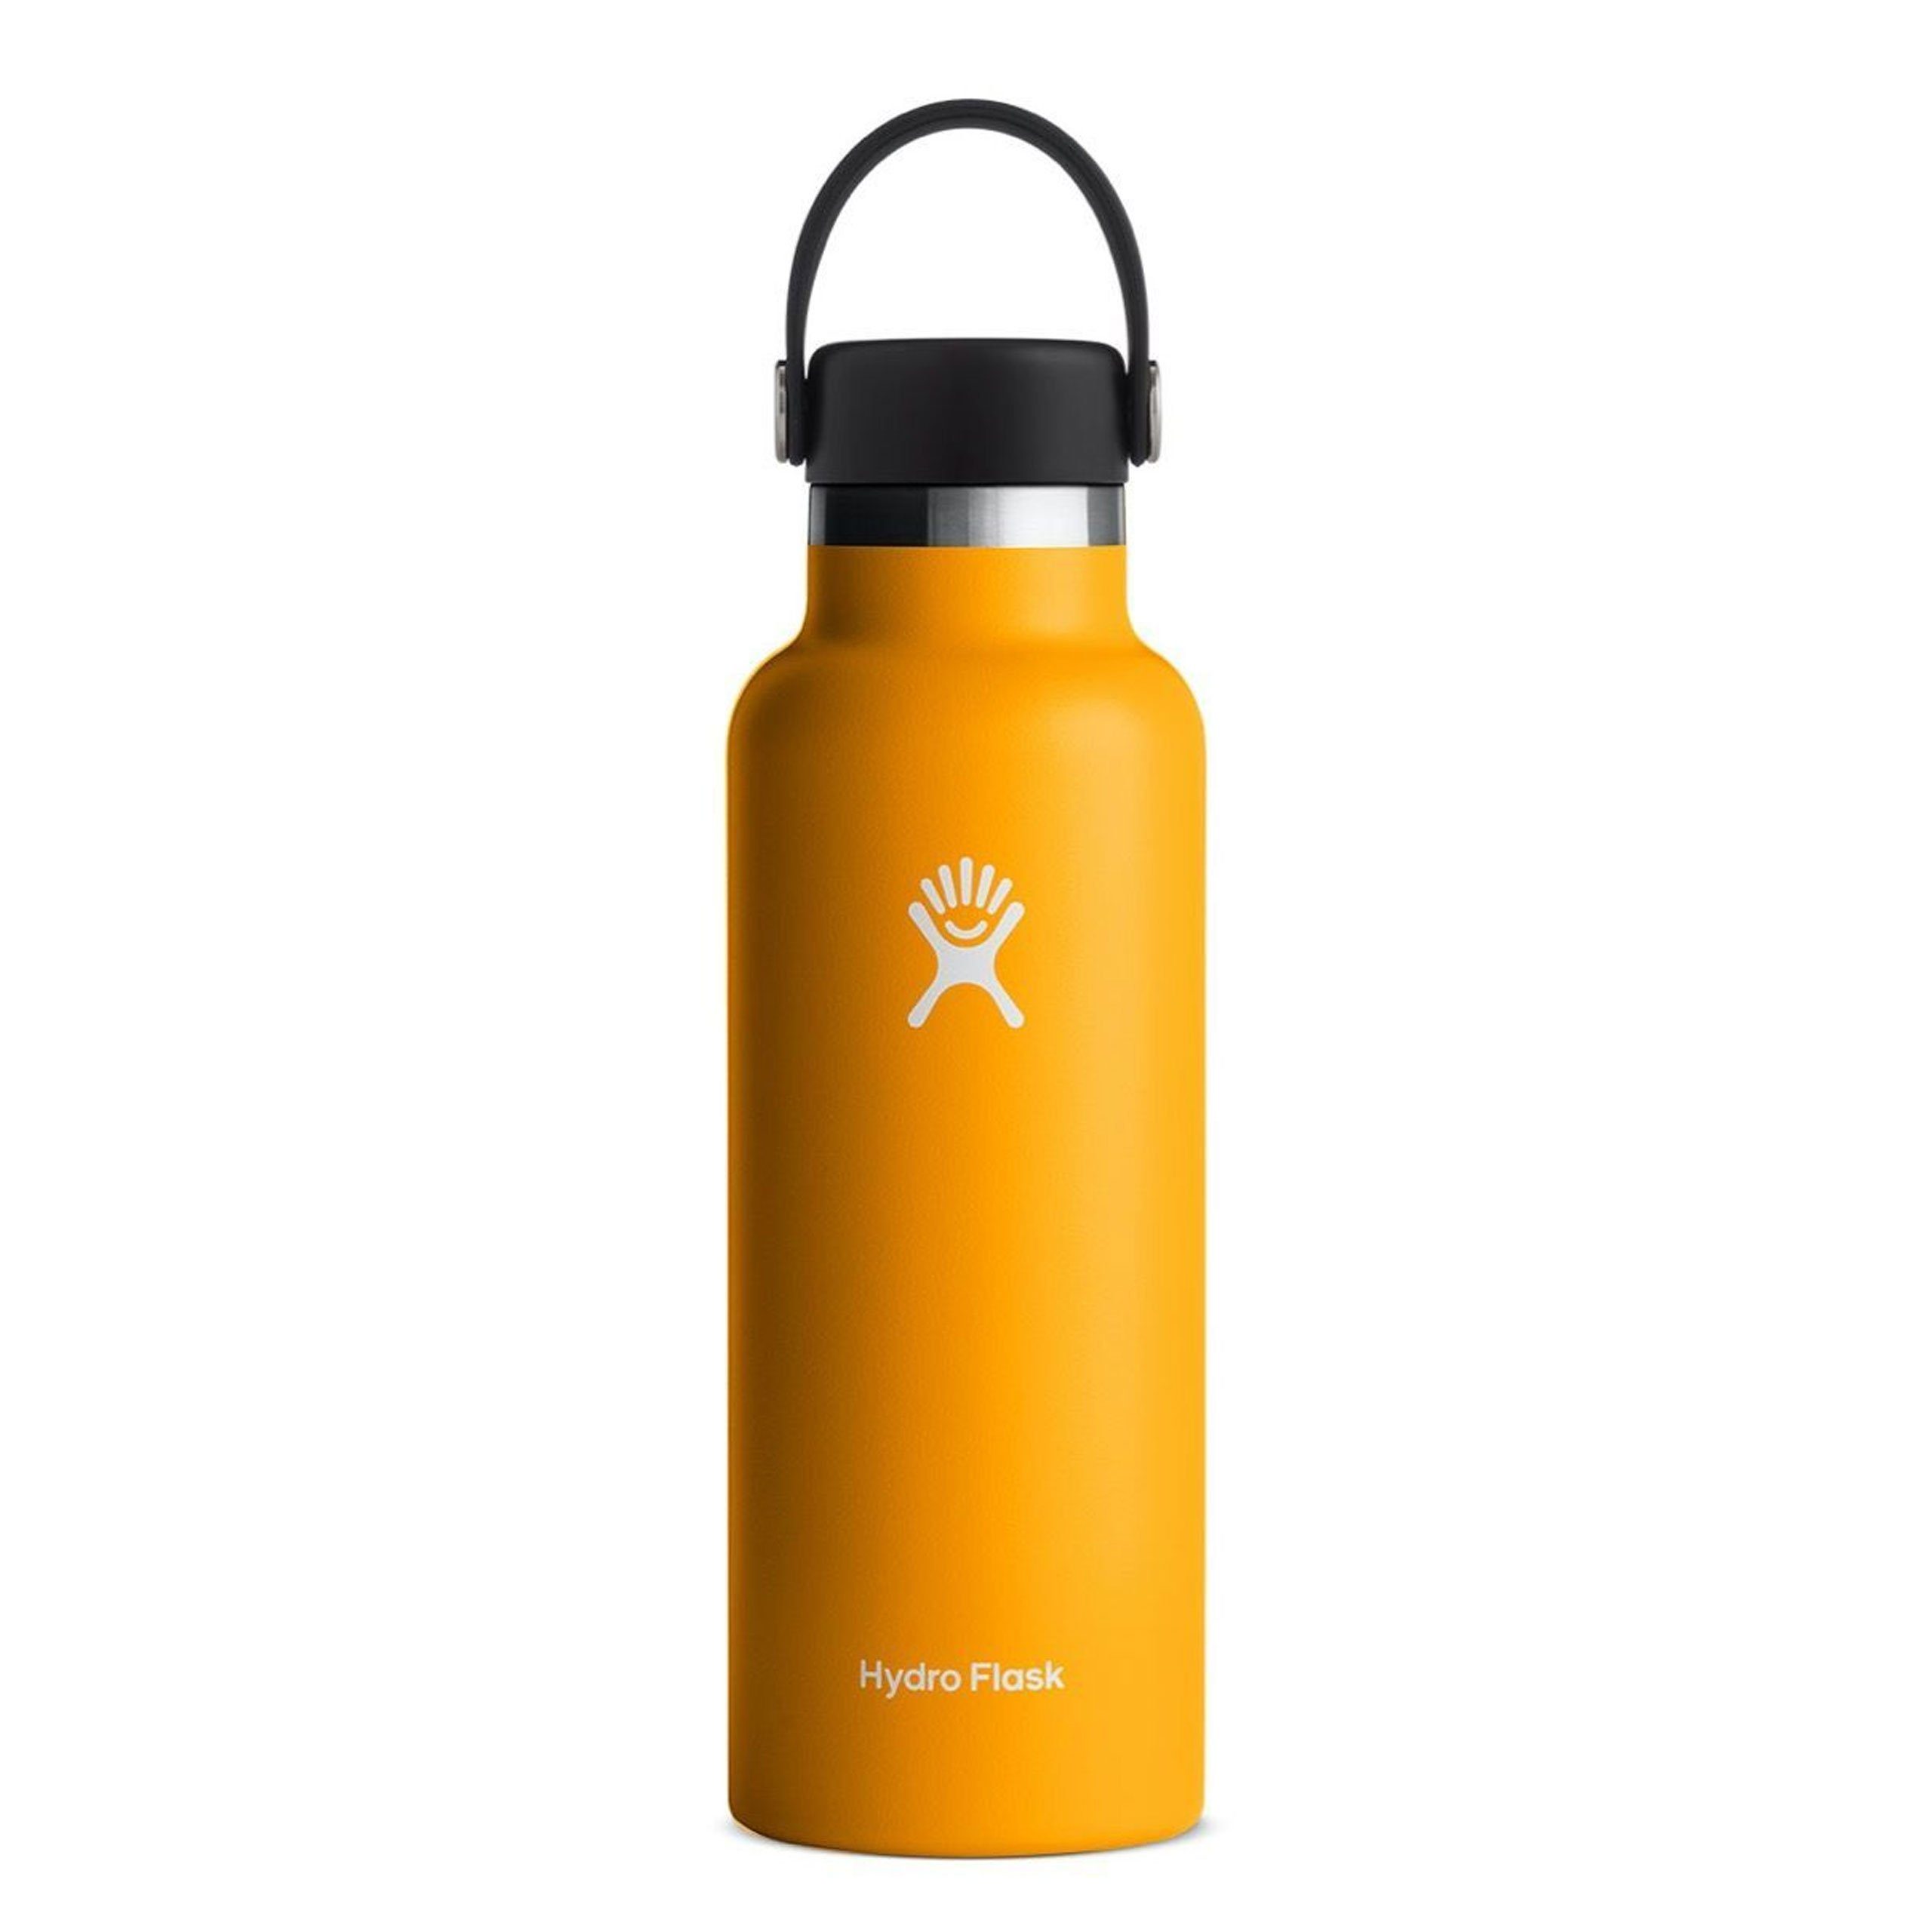 Hydro Flask Isolierflasche Hydro Flask Isolierflasche/Thermoflasche Mouth starfish - Bottle Standard